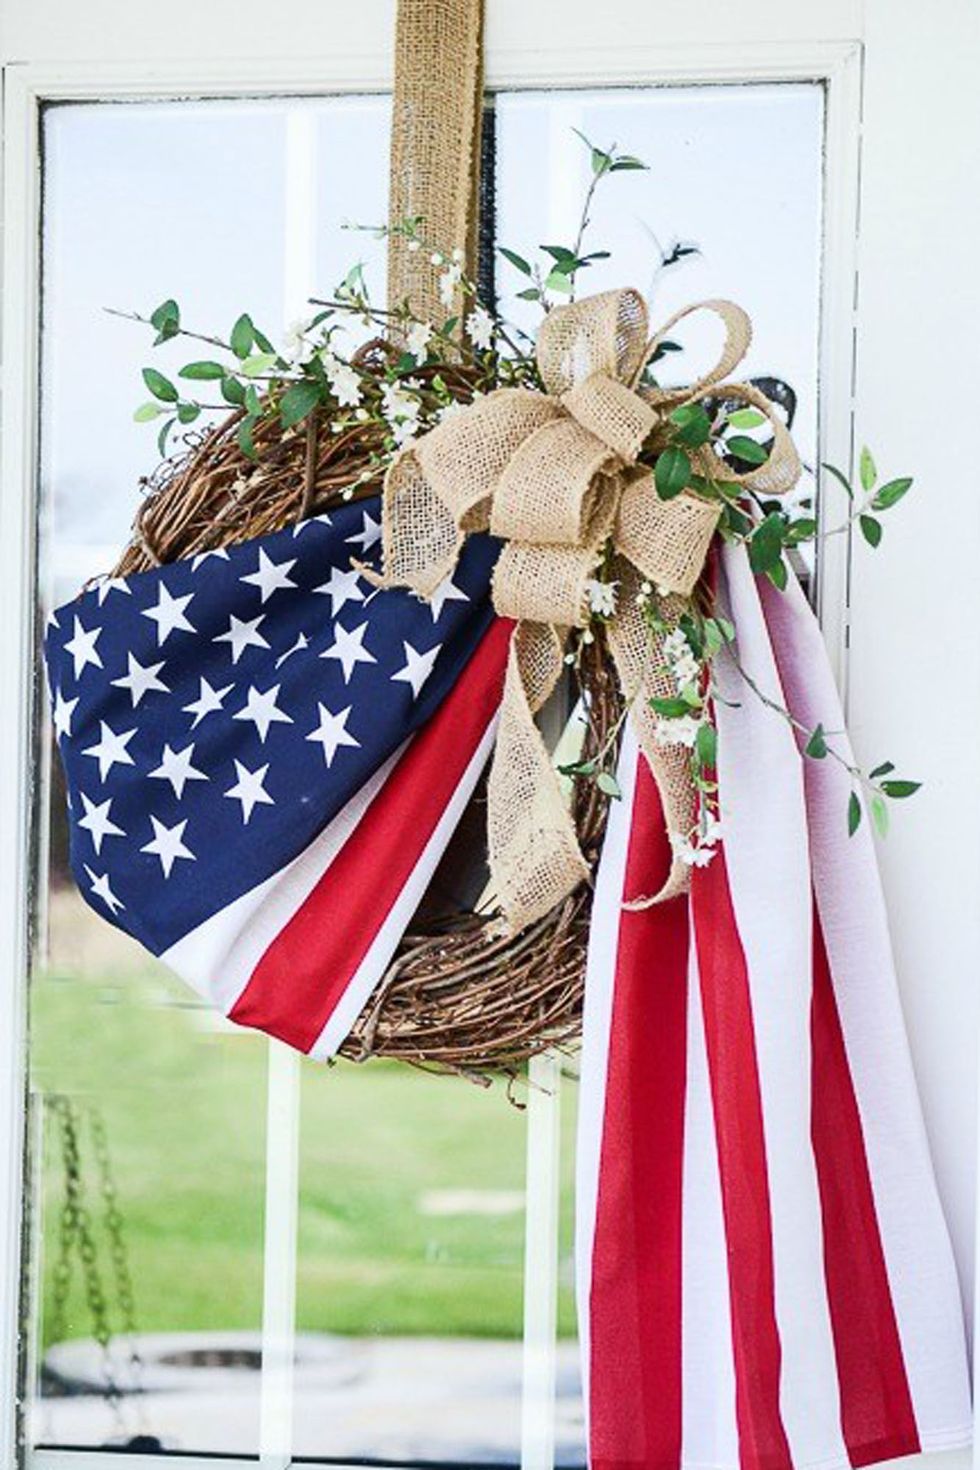 Wreath with US national colors of red, white and blue with stars